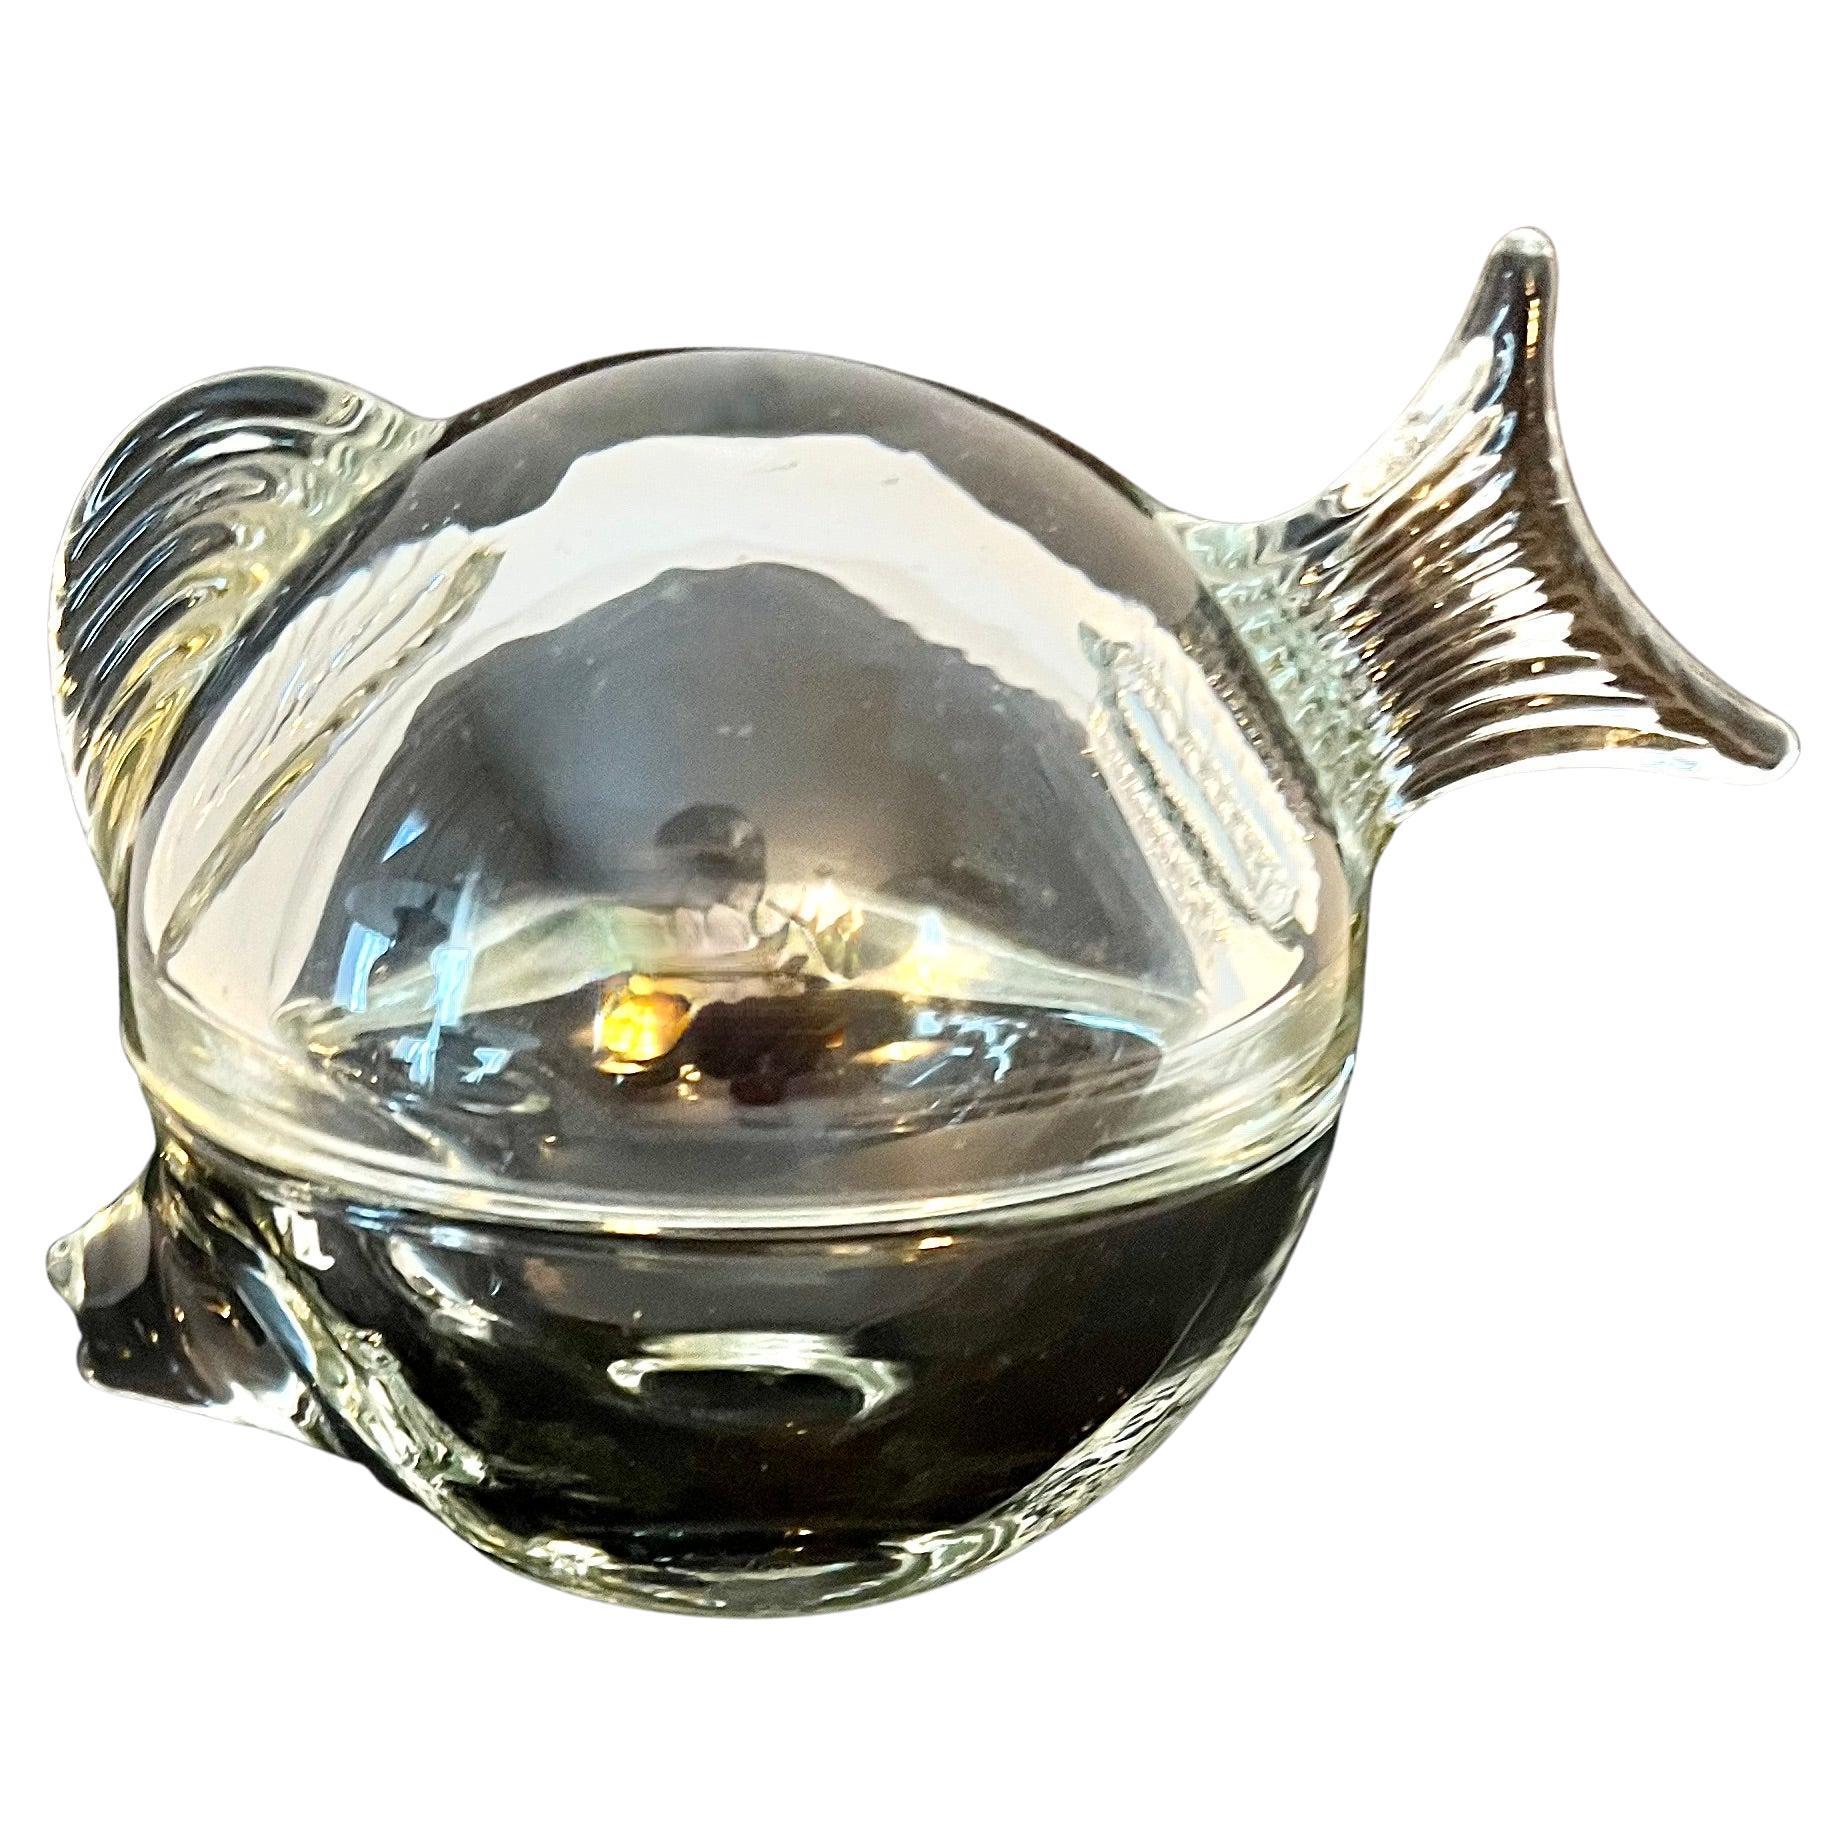 A lovely and unique lidded glass box in the shape of a fish. The piece is basically a sphere of glass with a fin tail and nose of a fish. 

A compliment to a desk or work station to hold paper clips or rubber bands. Also could be used on a